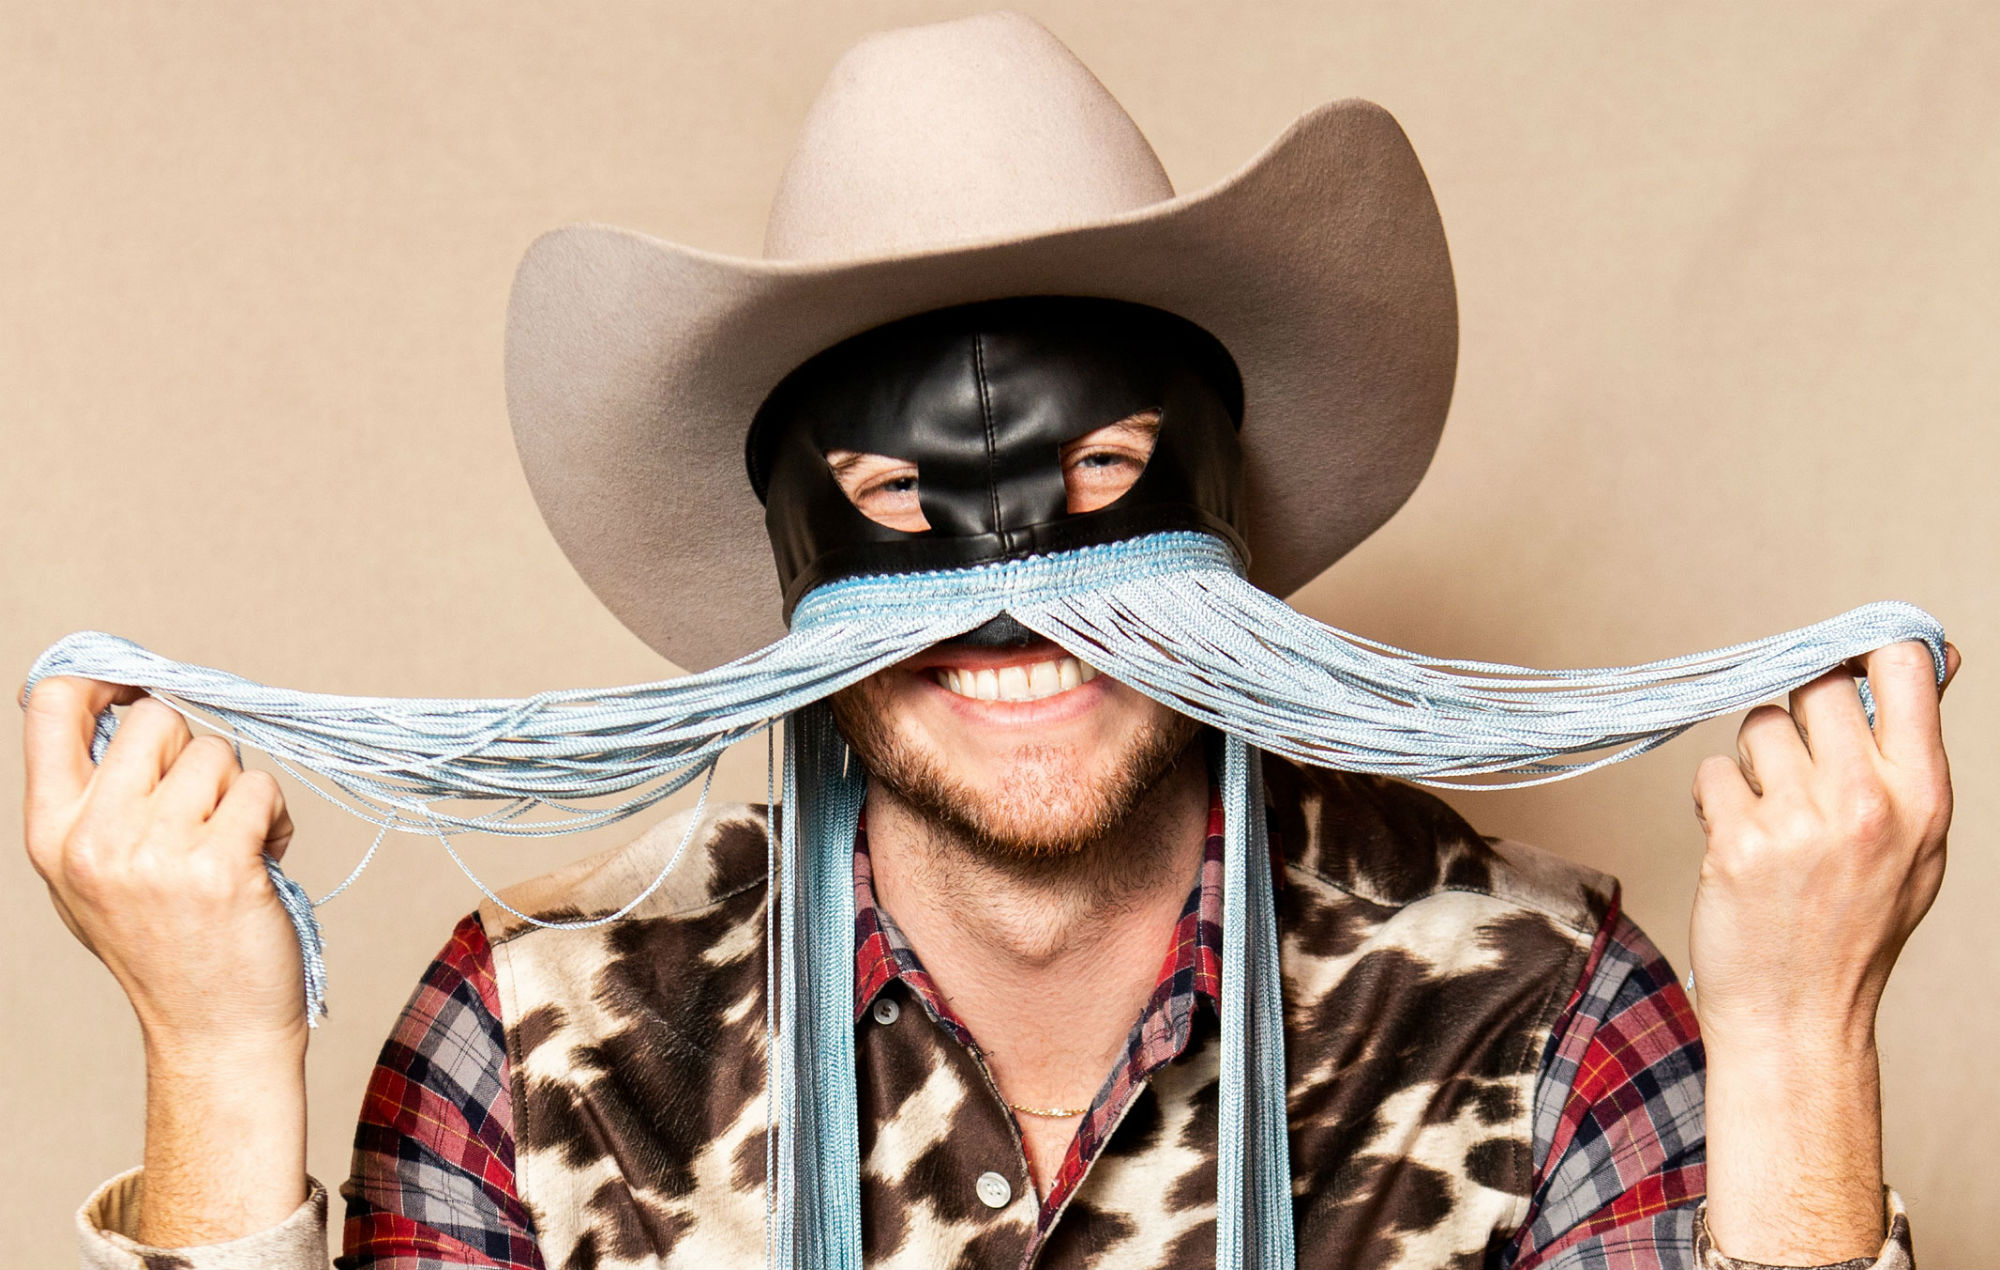 Orville Peck - Liam Gallagher invitation, Unique collaboration, Exciting moment, Music industry buzz, 2000x1270 HD Desktop